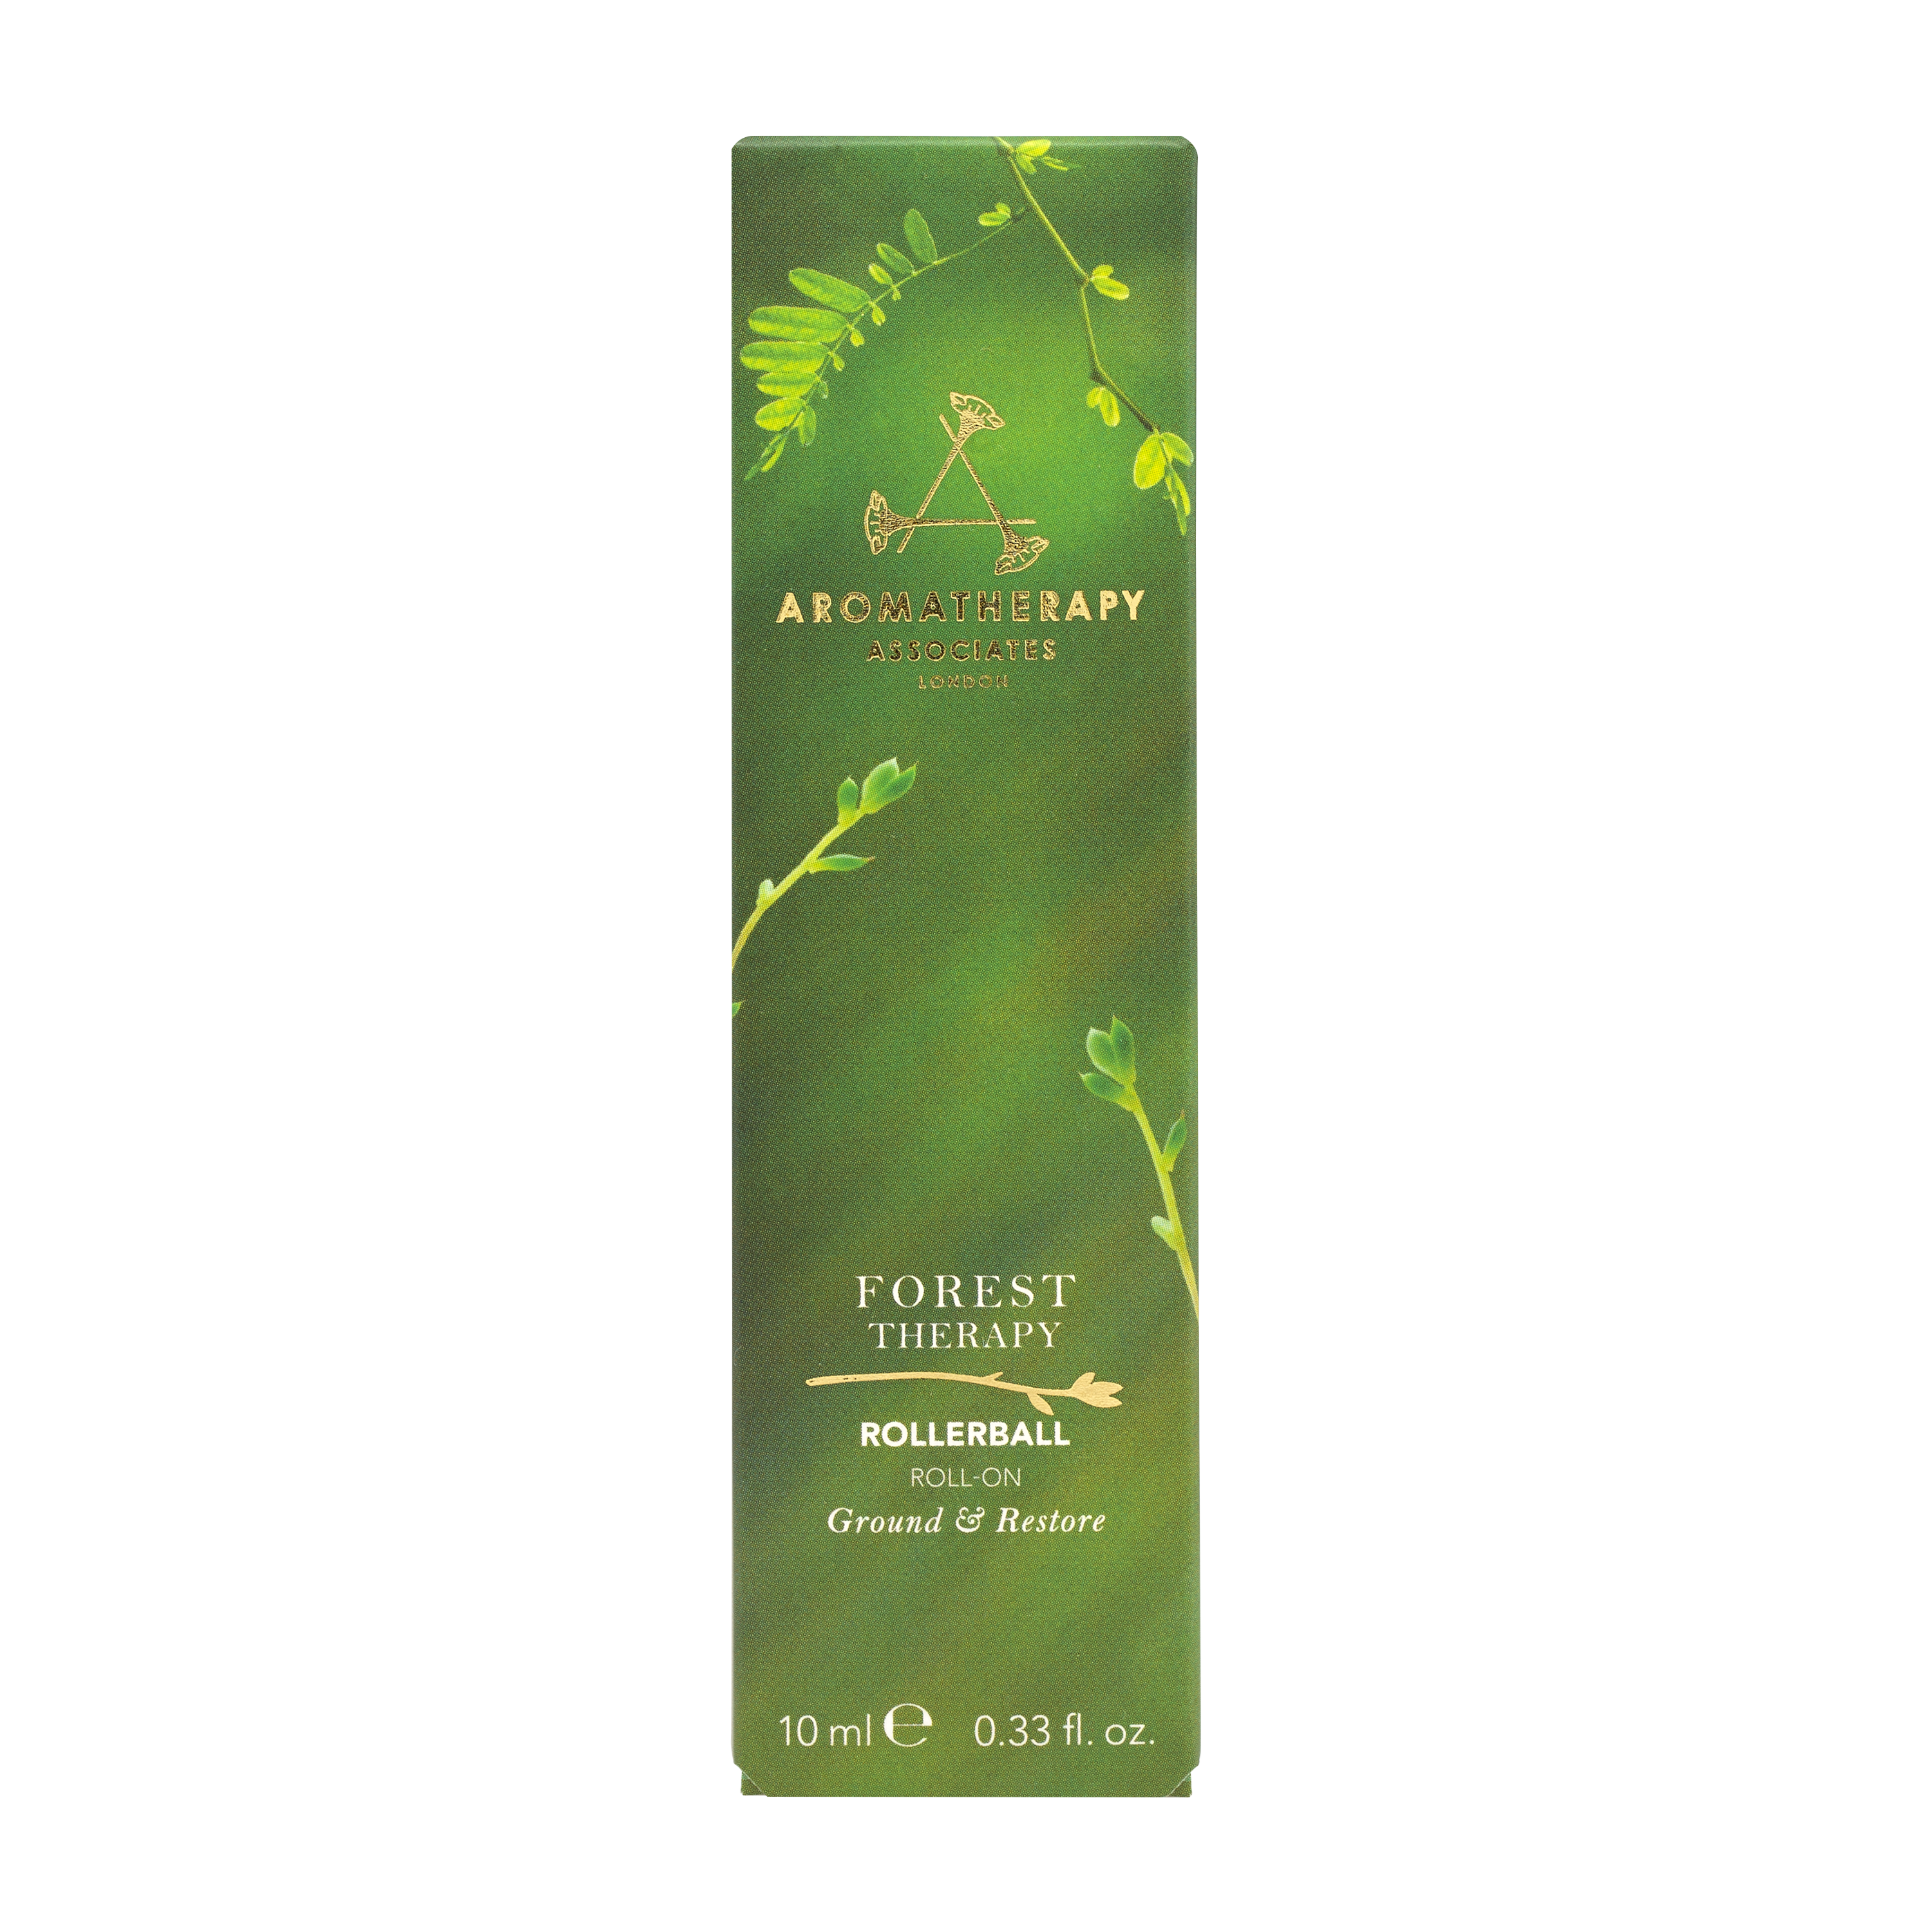 Forest Therapy Roller Ball Aromatherapy Associates